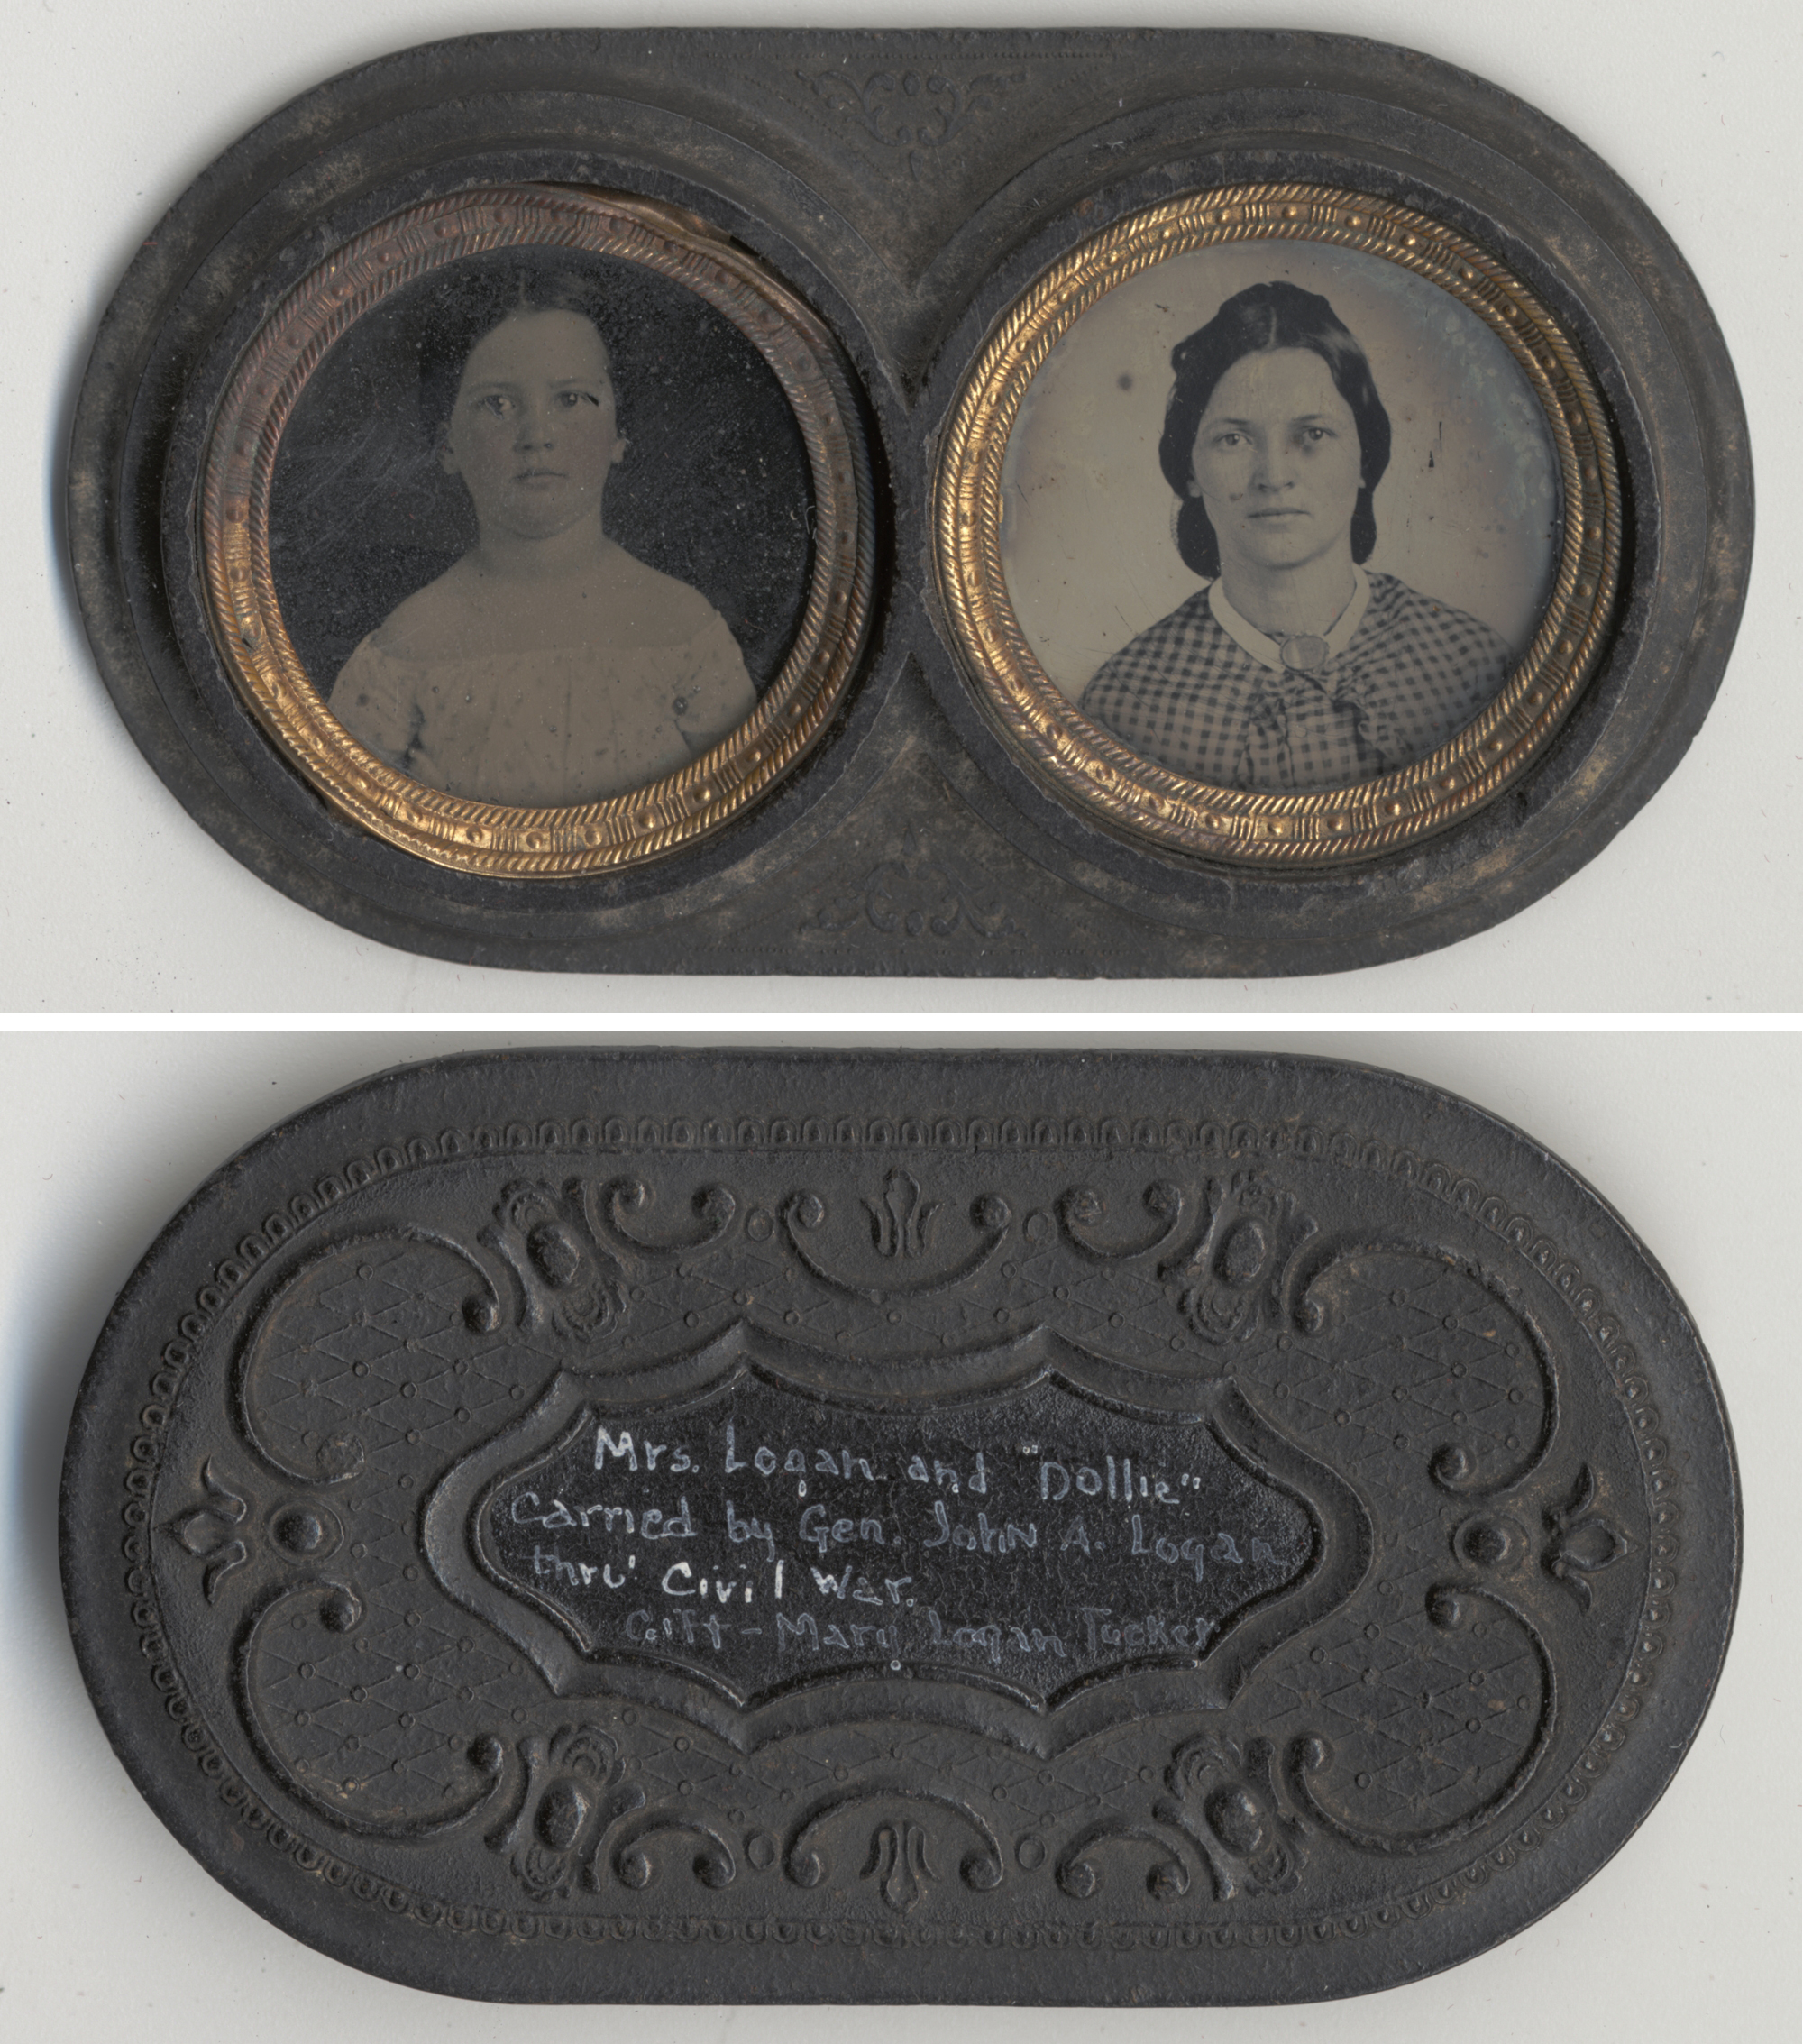 John Alexander Logan, Portrait photographs of Mrs. John A. Logan and Dollie Logan, c. 1858–64, tintypes set in brass and union case, plates 1 1/8 inches in diameter (Chicago History Museum)